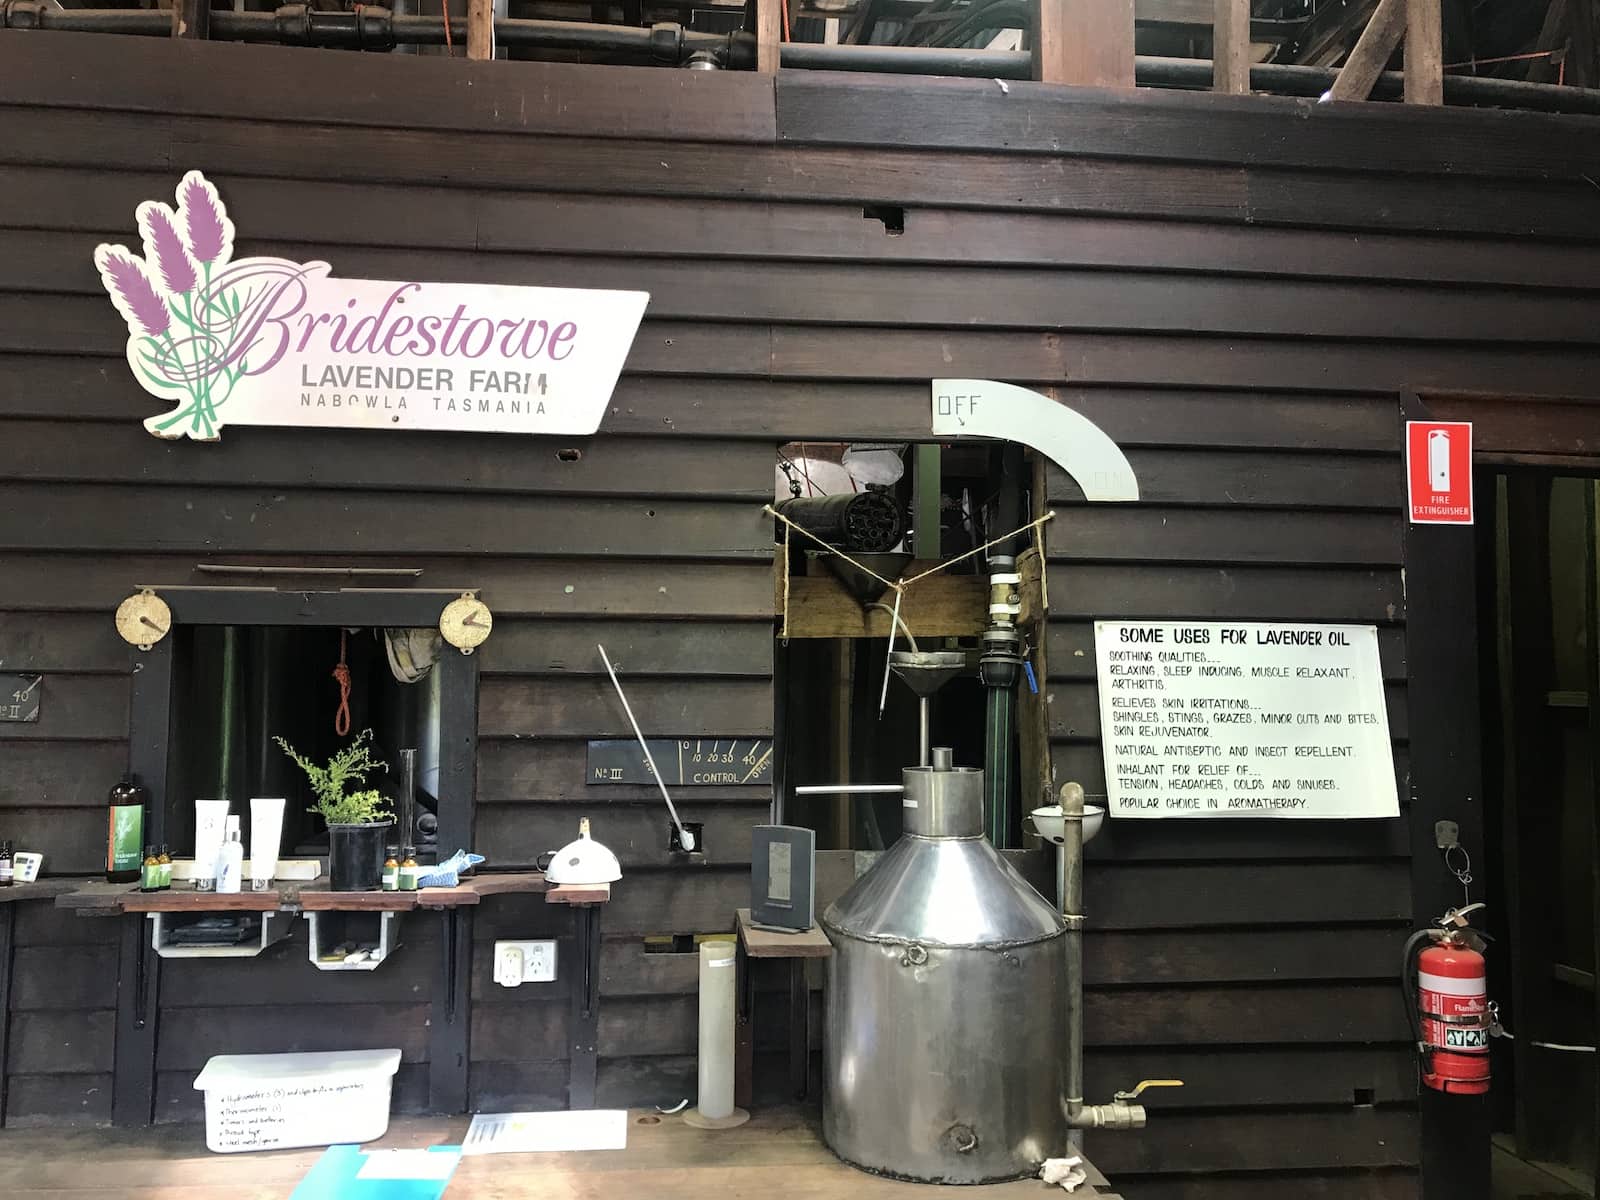 The interior of a distillery with a sign showing “Some uses for lavender oil” and some machinery in the foreground